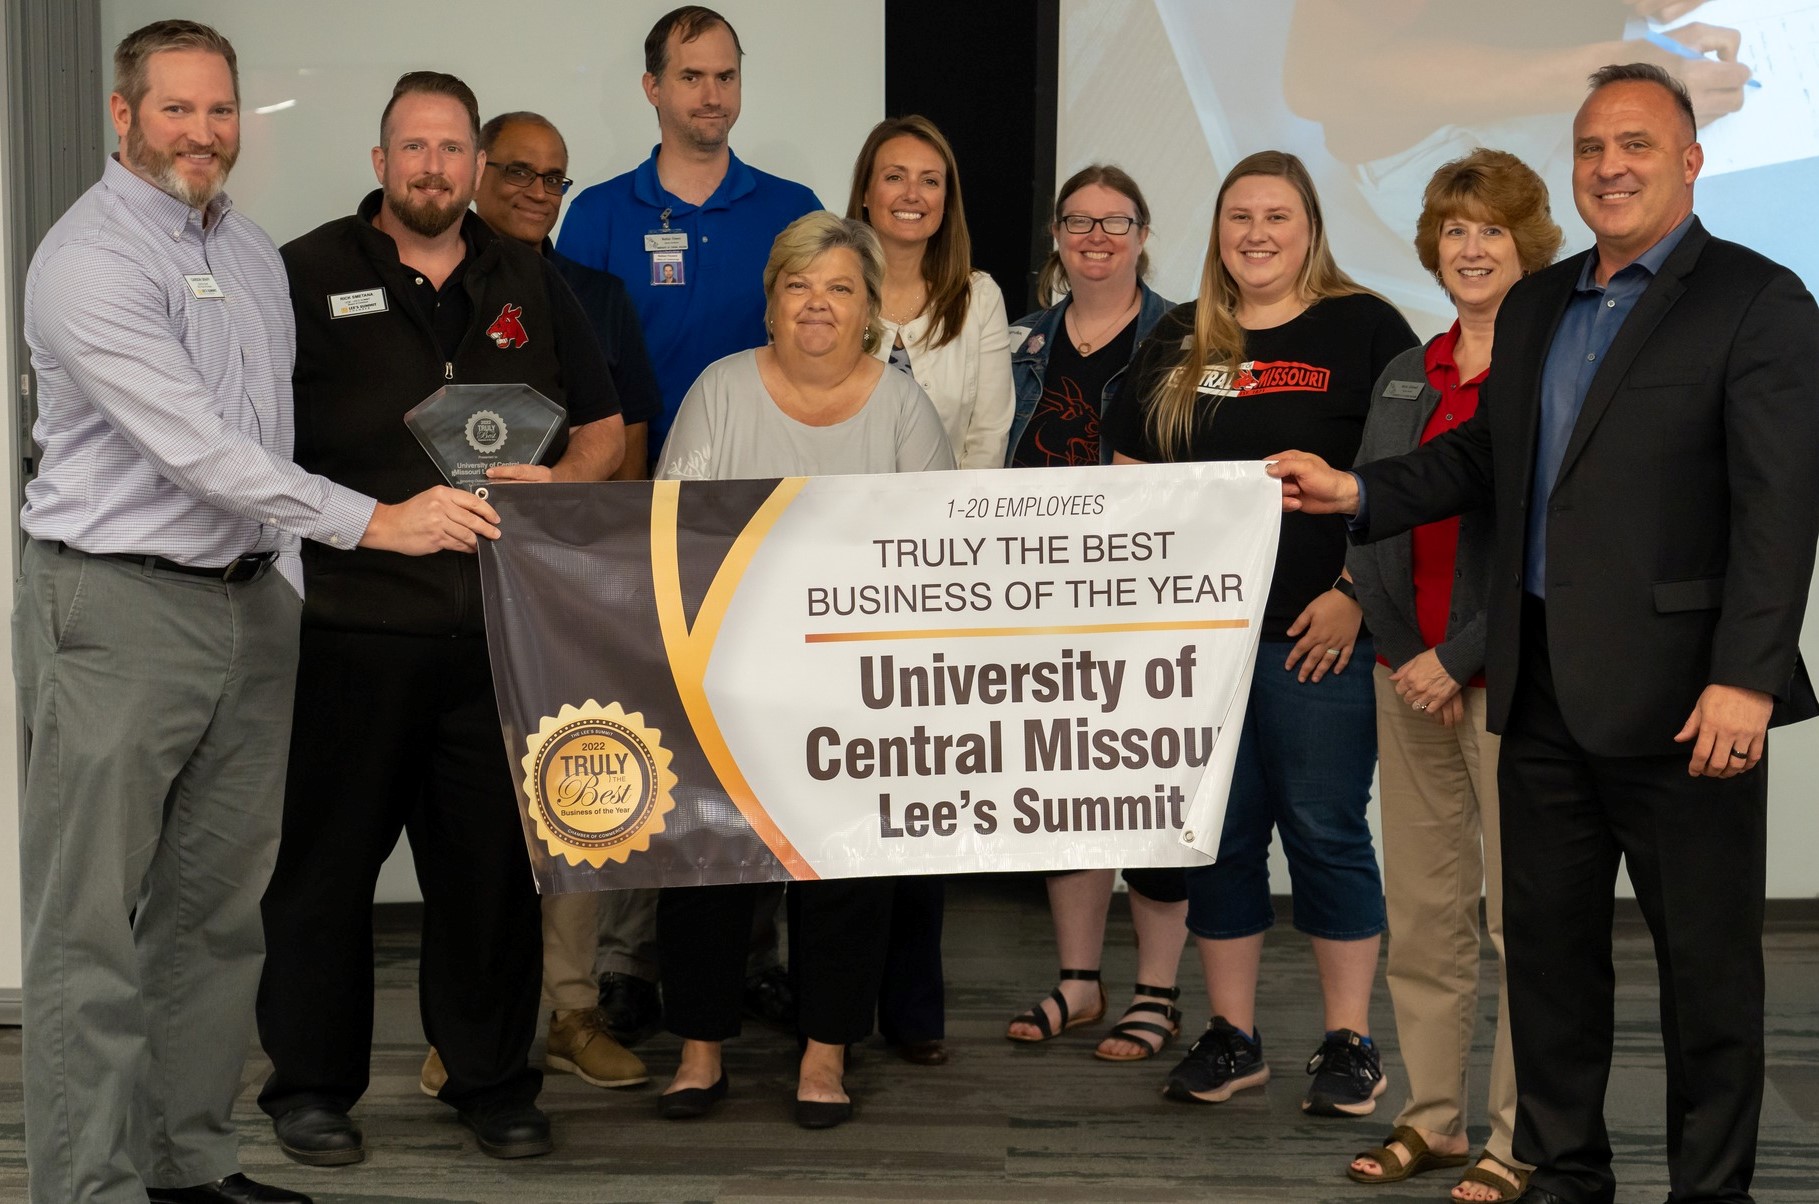 University of Central Missouri Lee’s Summit Campus Receives Chamber of Commerce Simply the Best Business of the Year Award